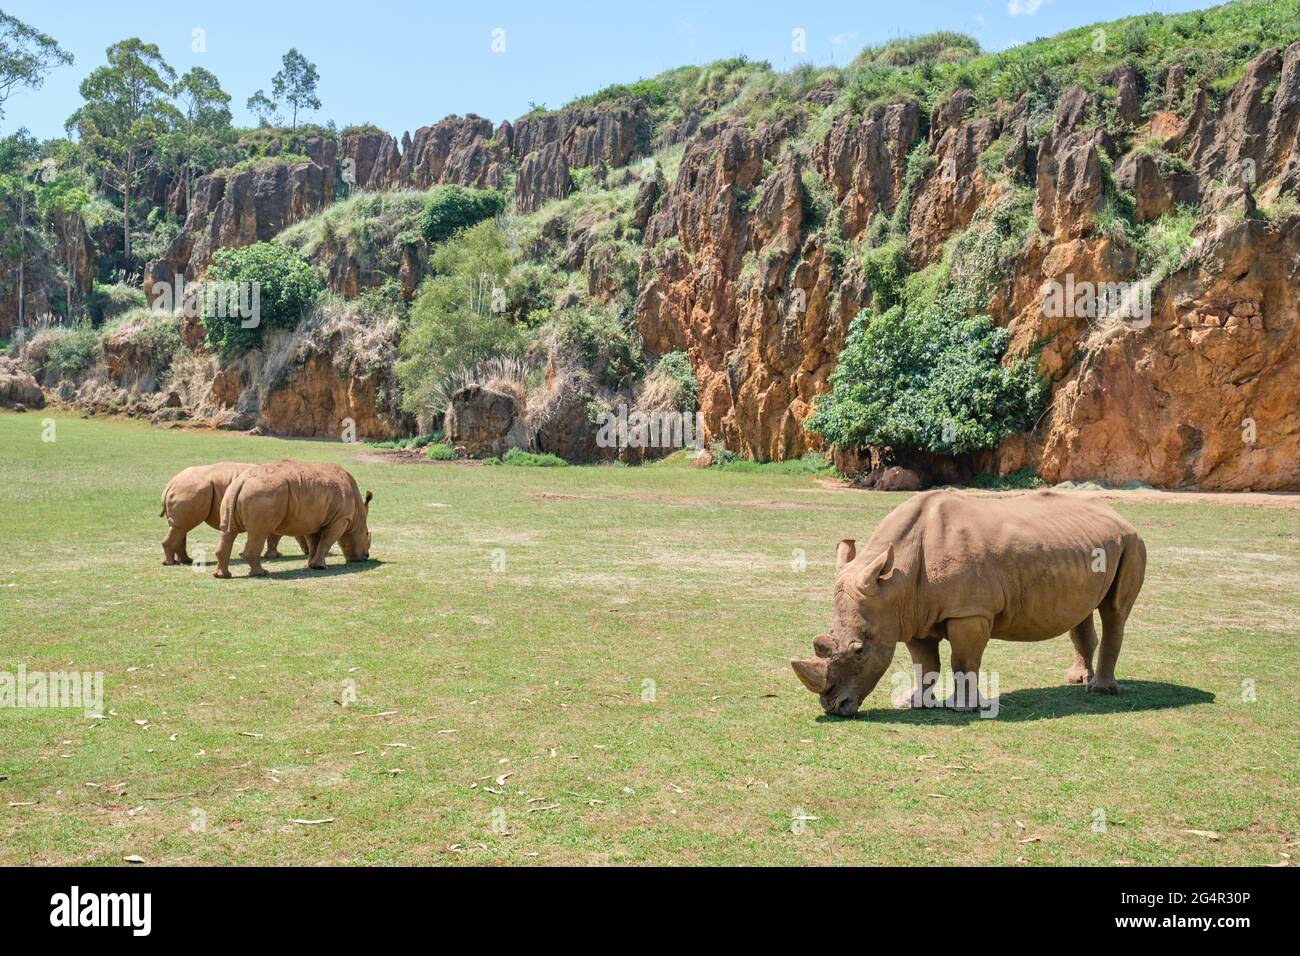 Rhinoceroses eating grass in Cabarceno Natural Park in Cantabria, Spain. Stock Photo